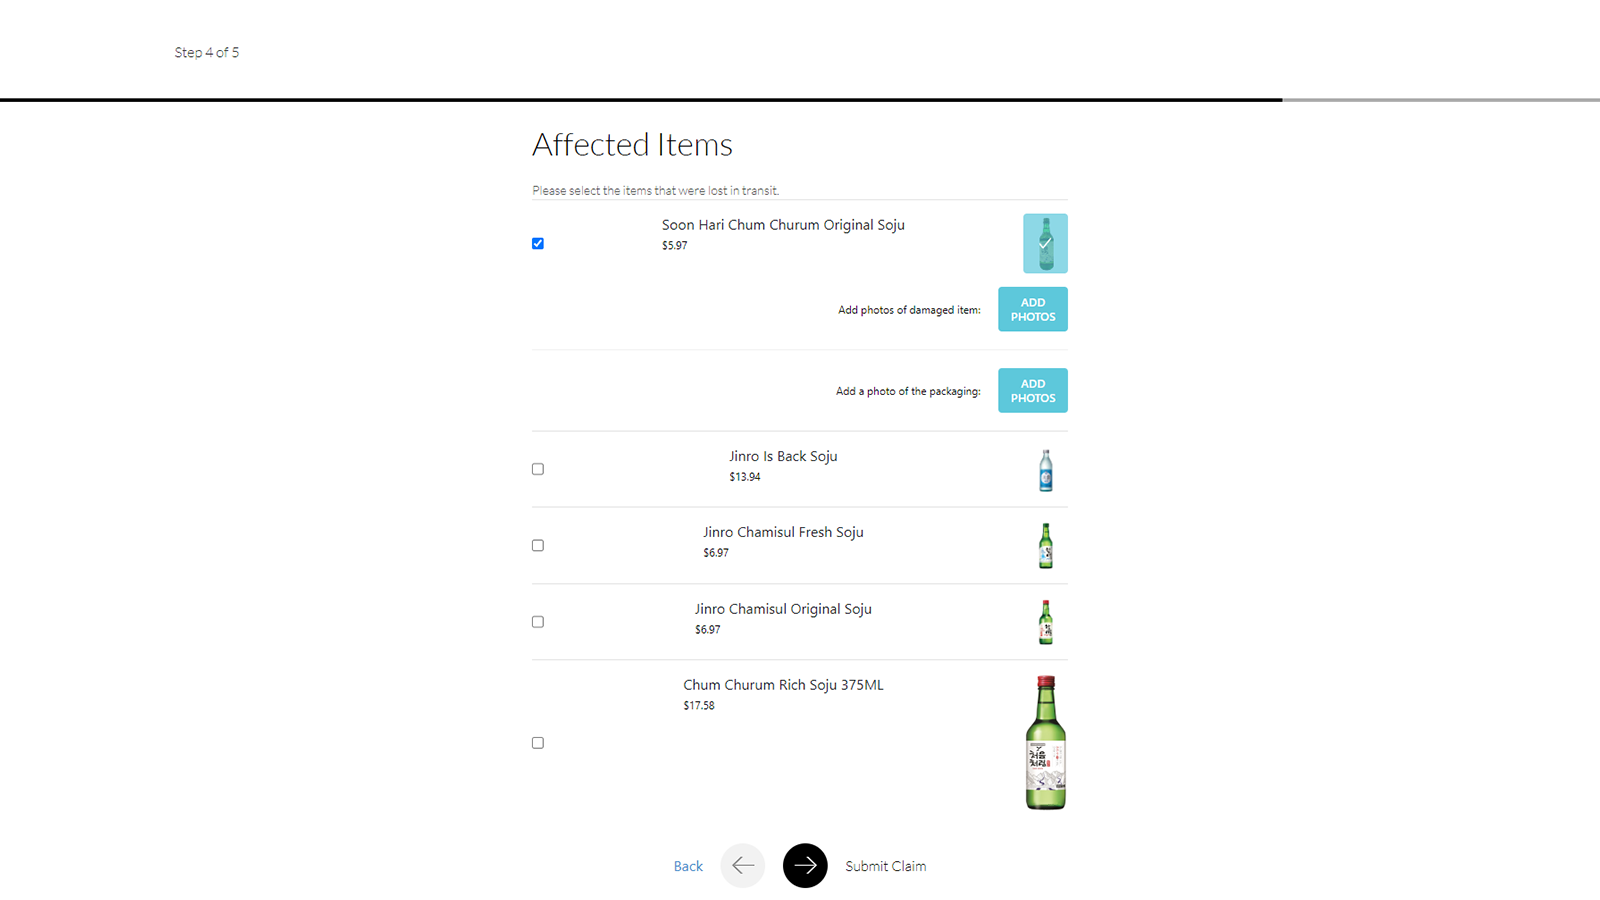 insurify | file claim | order found | Select defected items